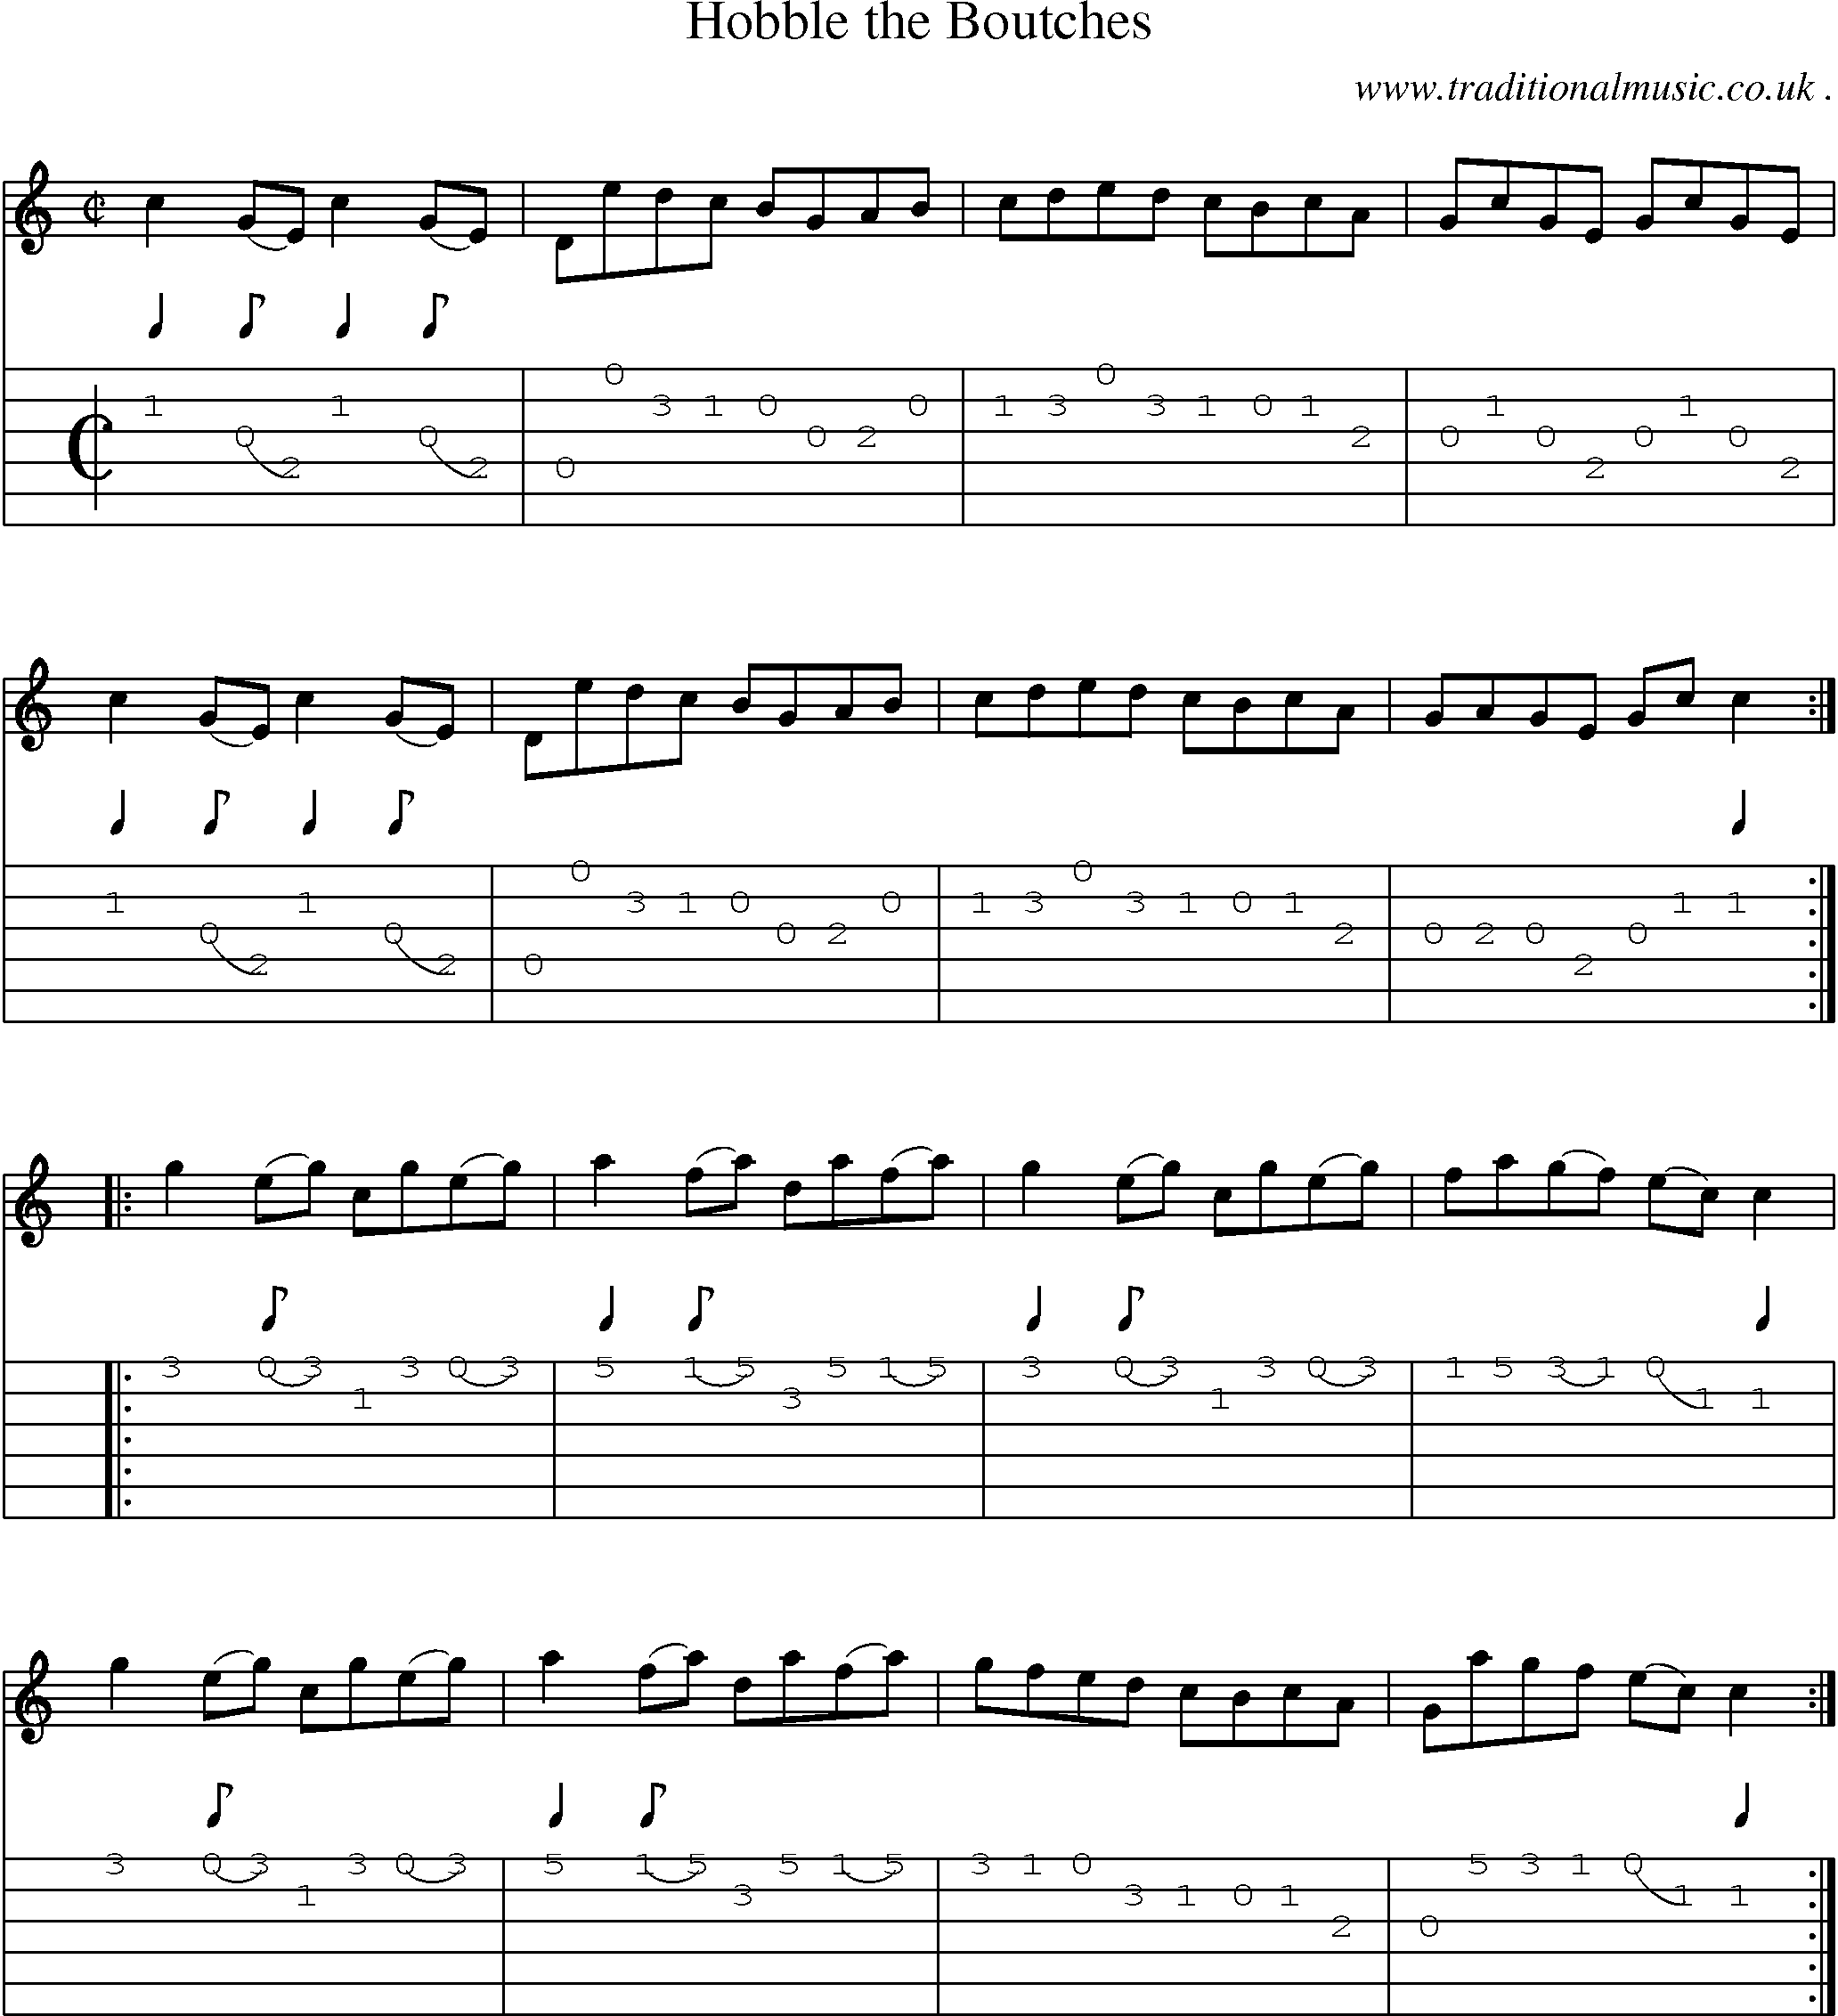 Sheet-Music and Guitar Tabs for Hobble The Boutches